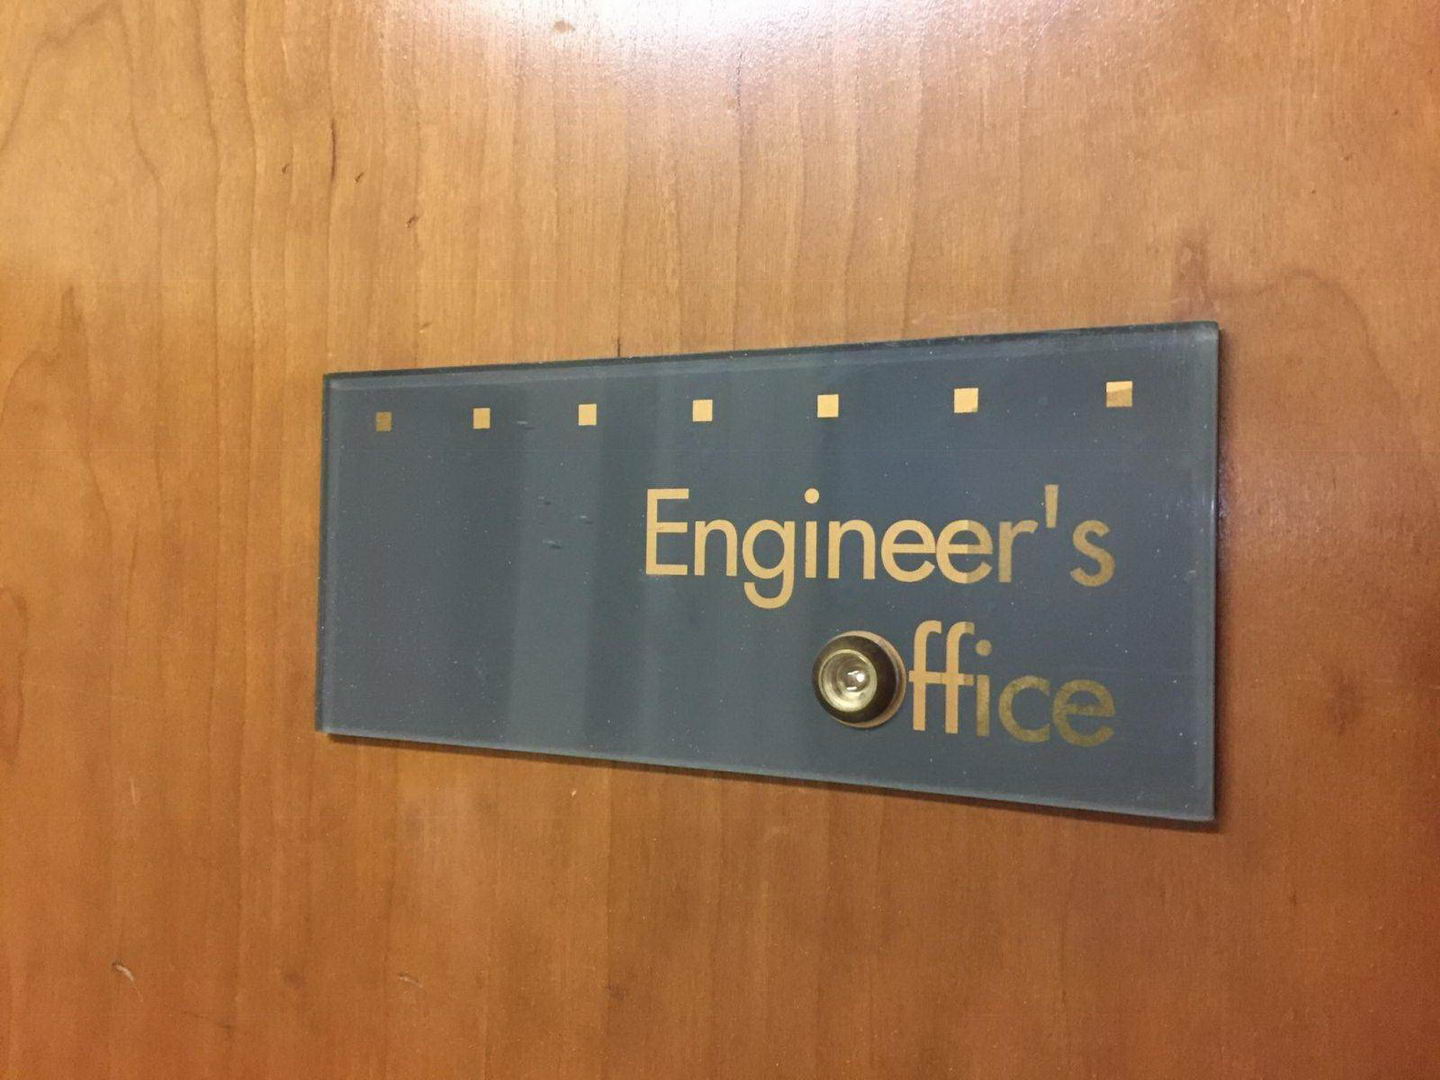 funny pic nameplate - Engineer's Engineer's Office